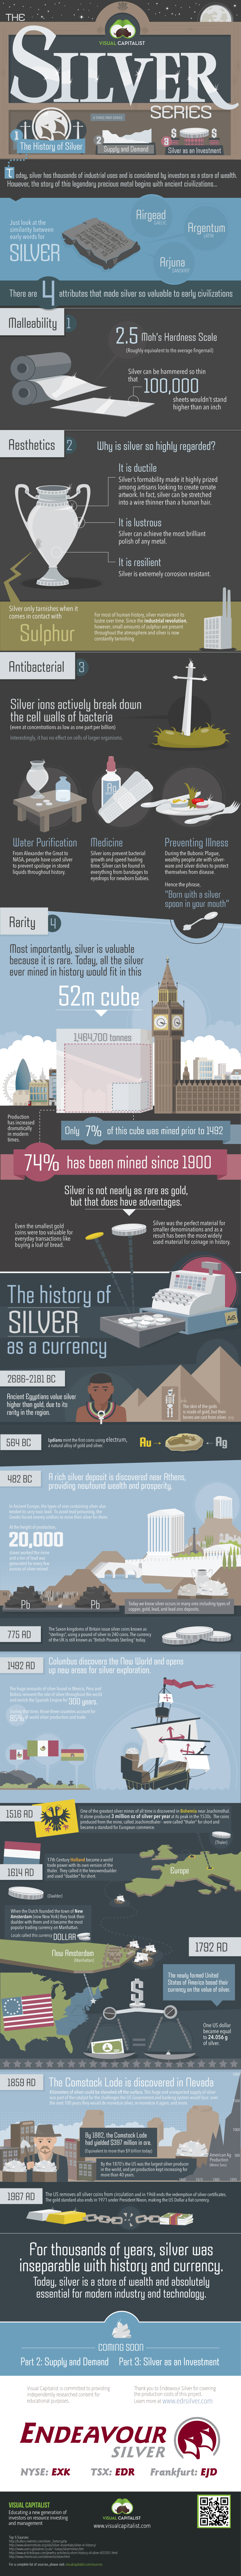 01 HISTORY OF SILVER